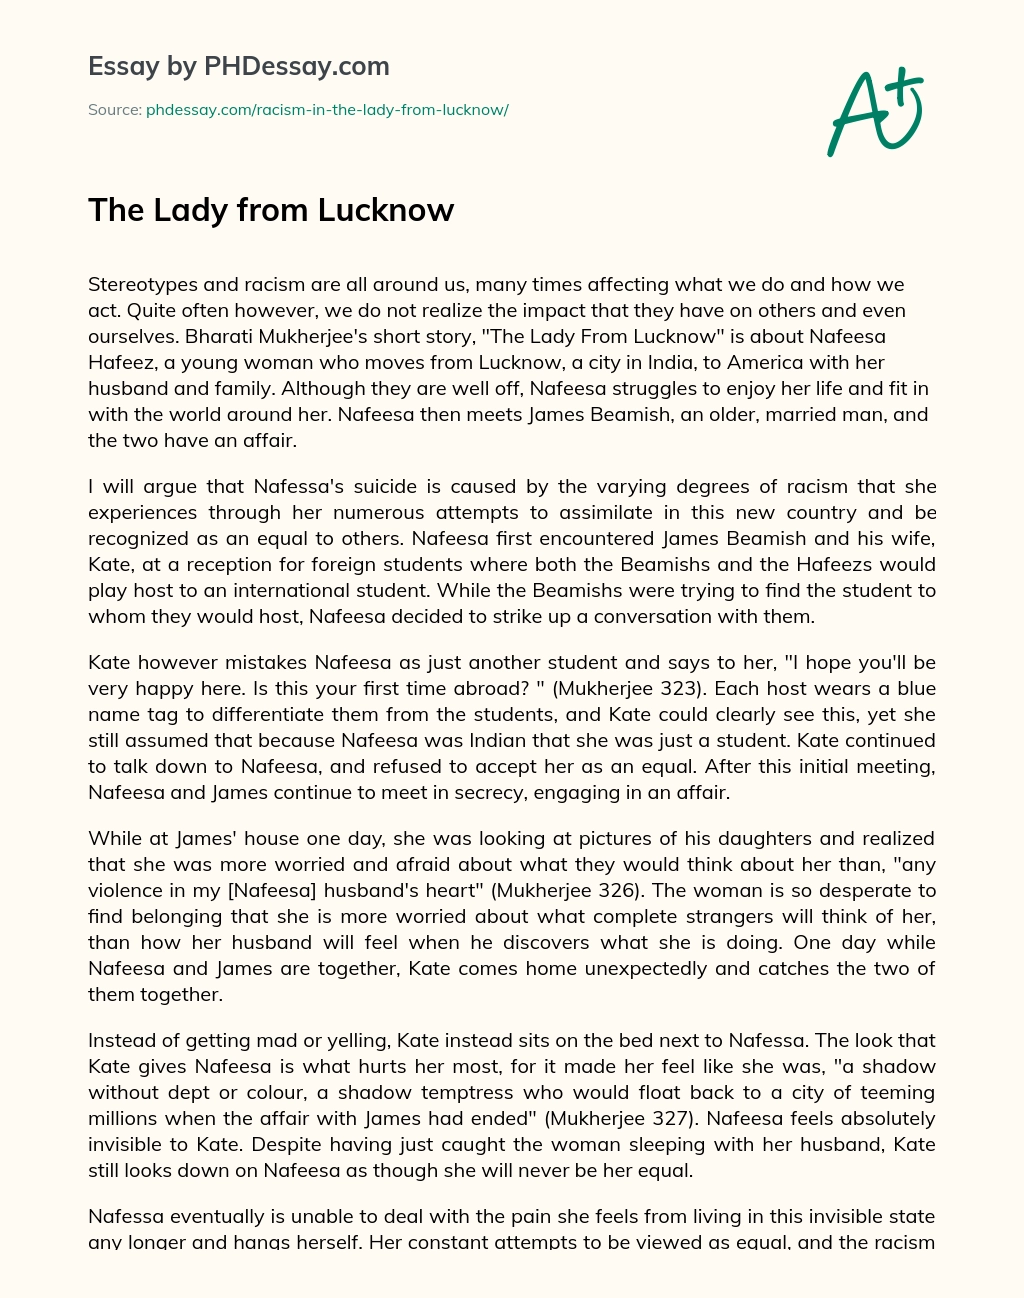 The Lady from Lucknow essay